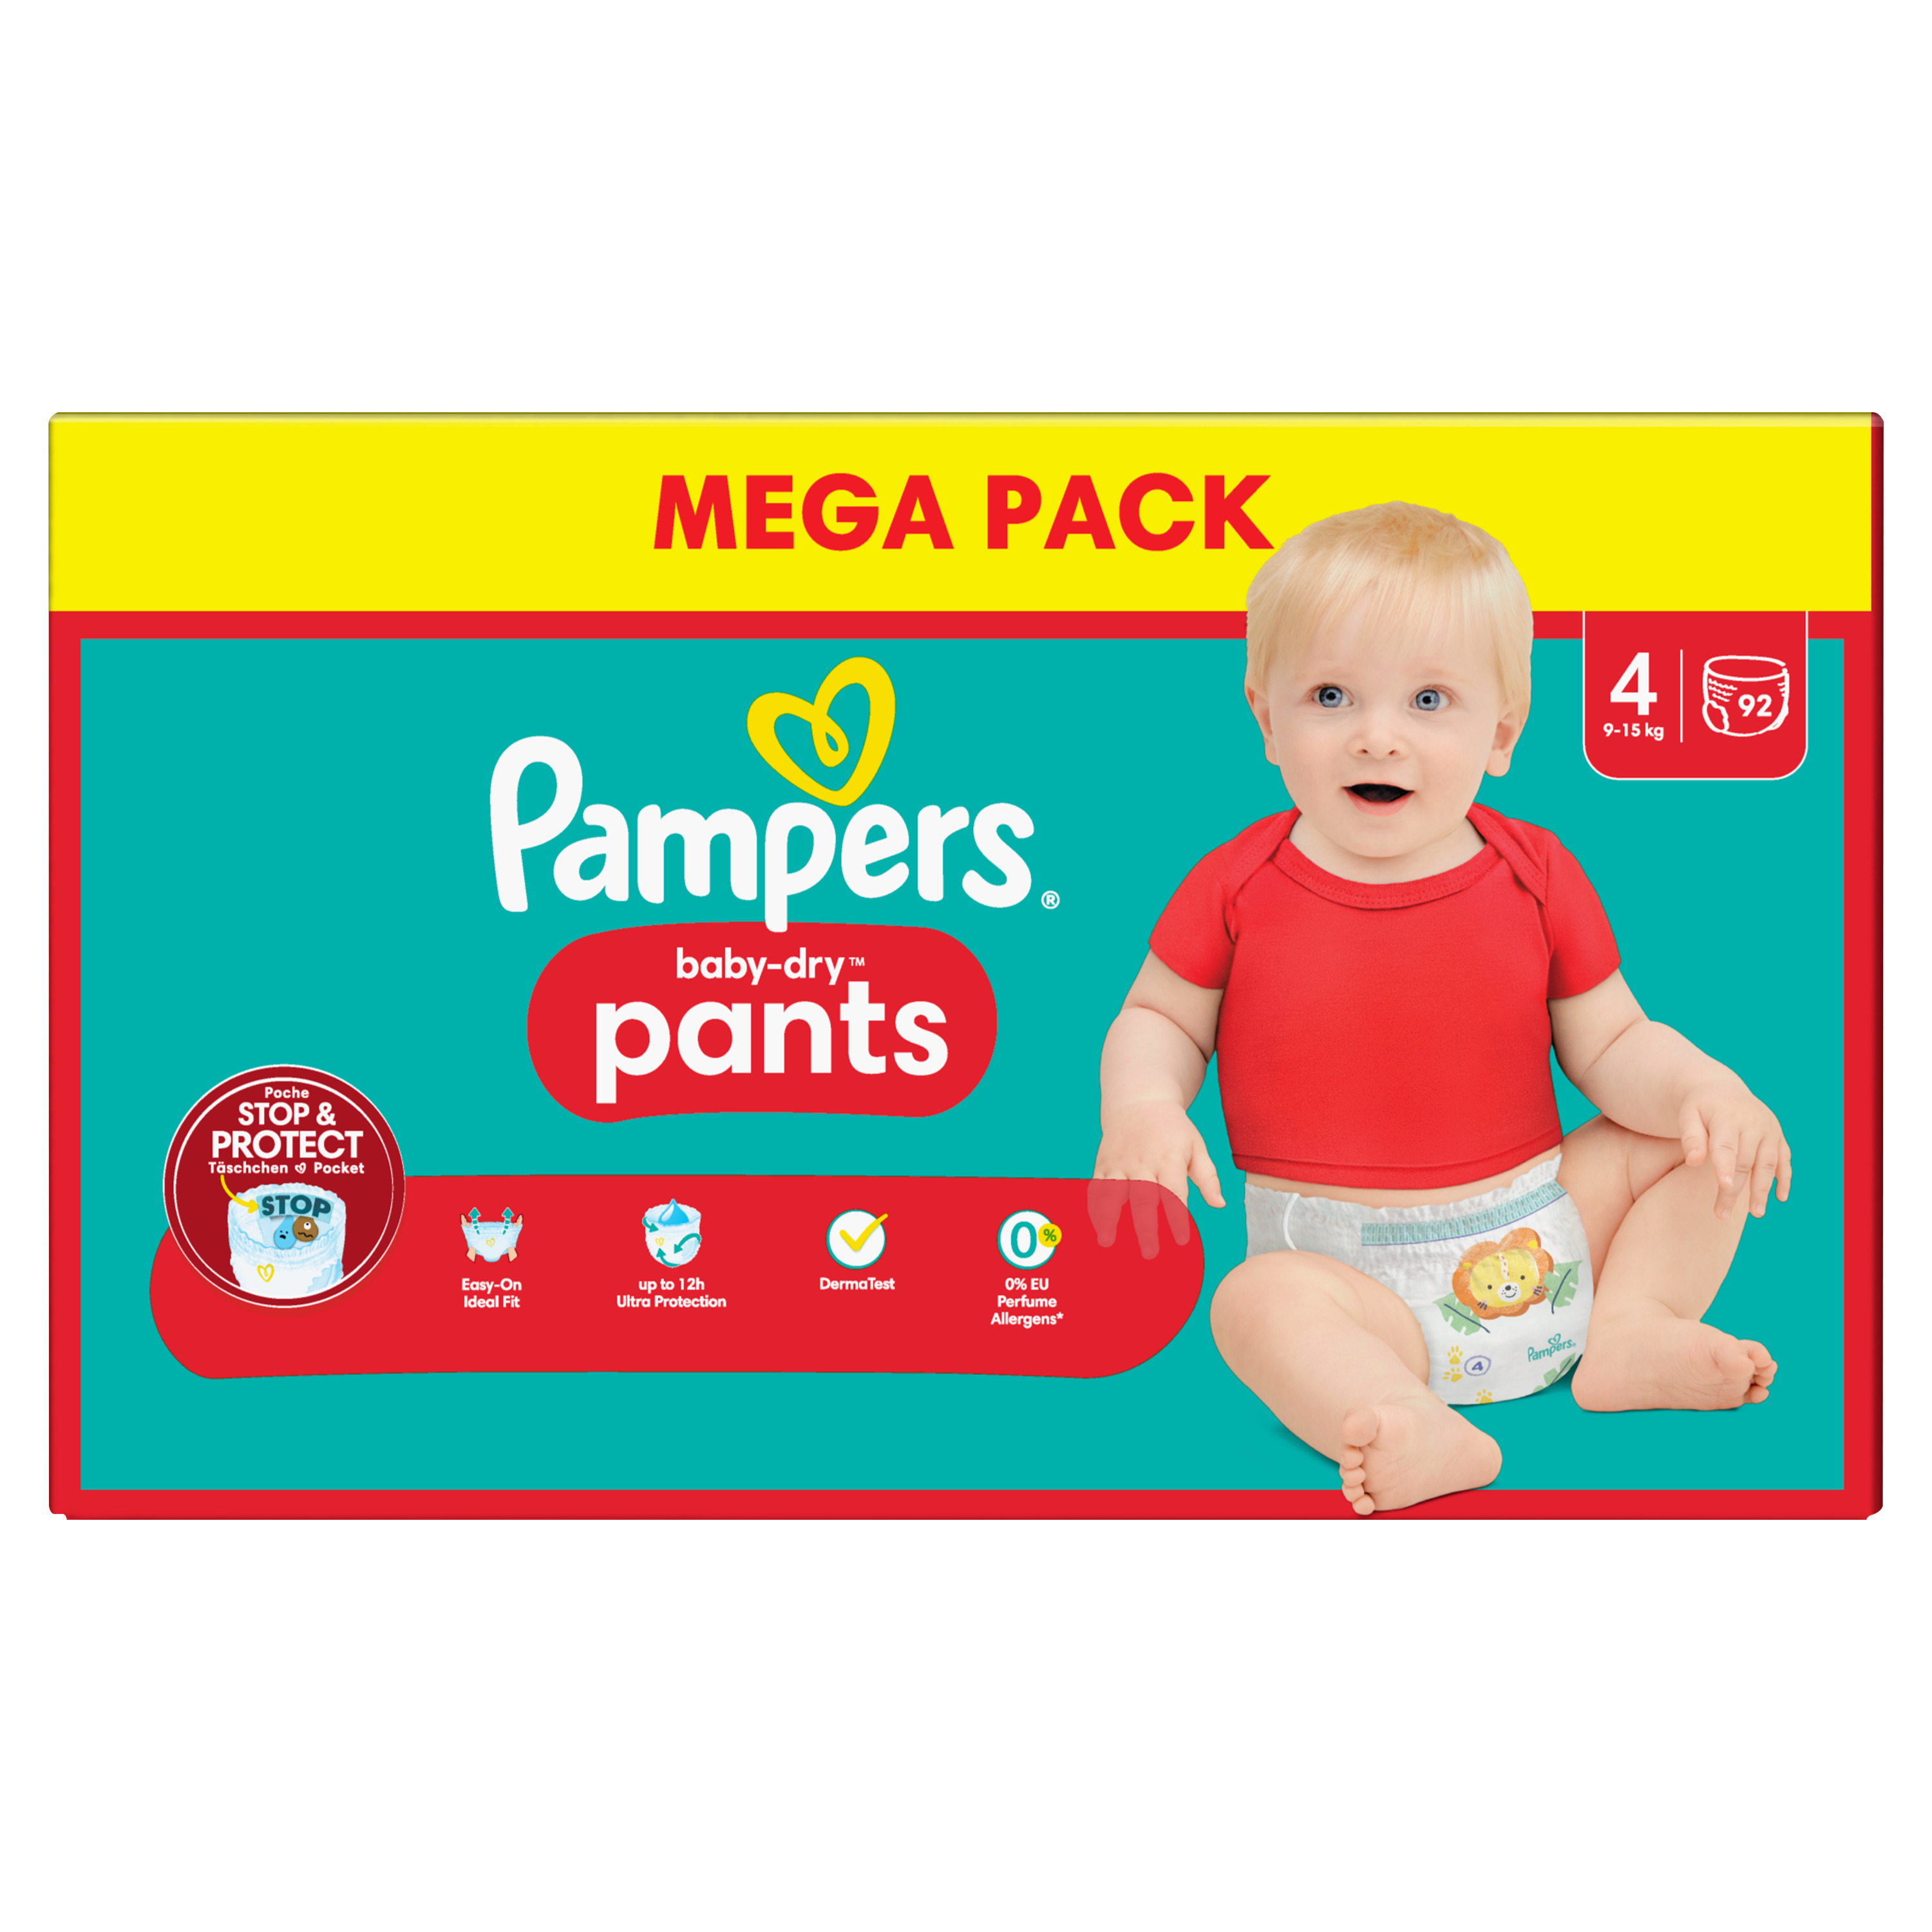 Pampers - Bébé Dry Pants - Taille 8 - Mega Pack - 36 couches-culottes